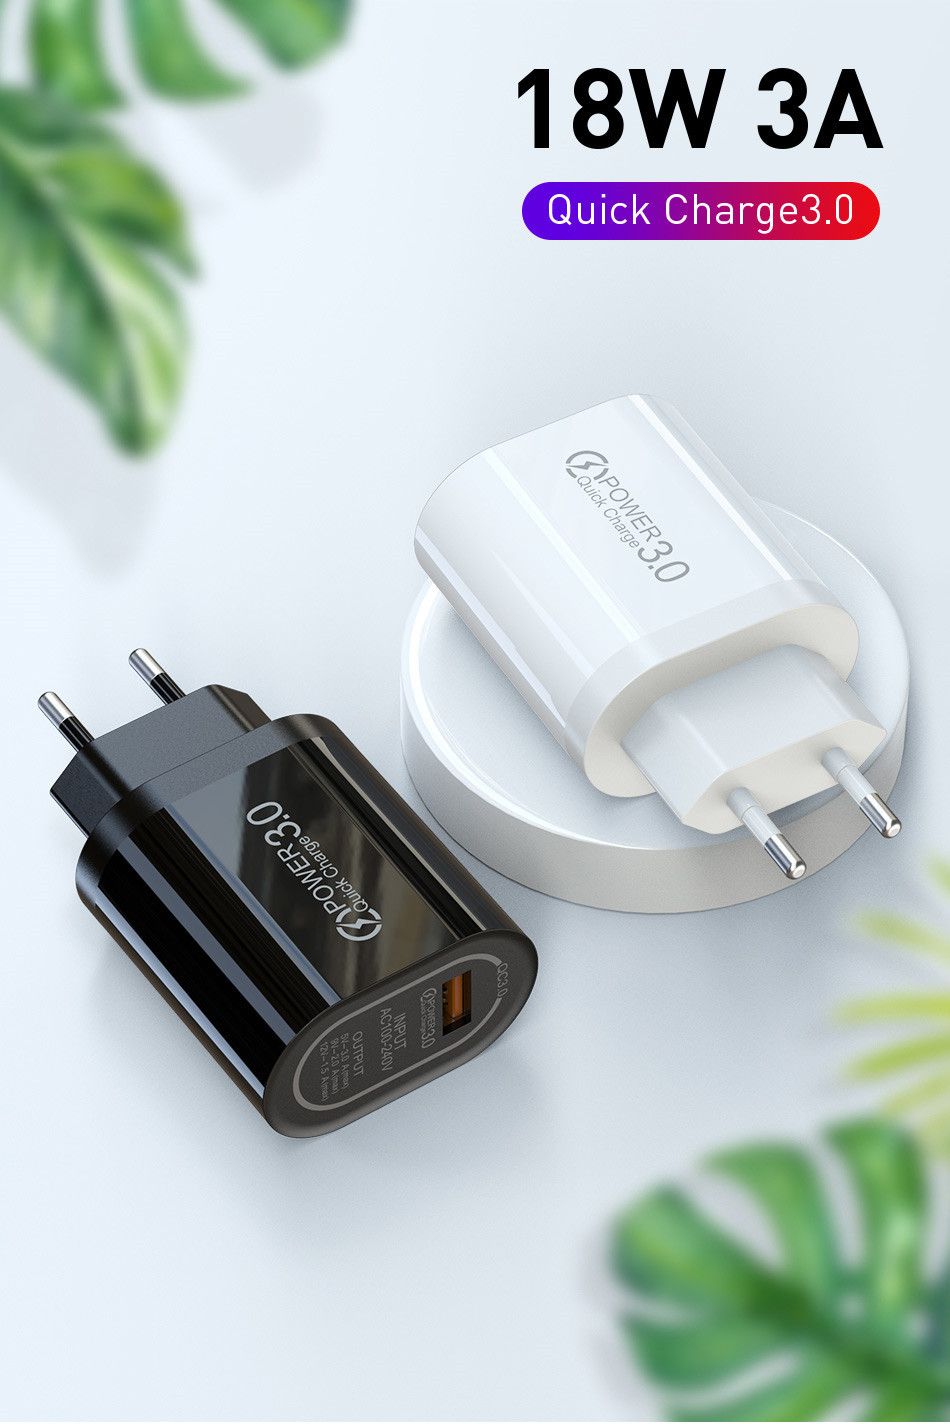 Bakeey-USB-Charger-QC30-Universal-Fast-Charging-USB-Charger-For-iPhone-XS-11-Pro-Xiaomi-Mi10-Redmi-N-1686568